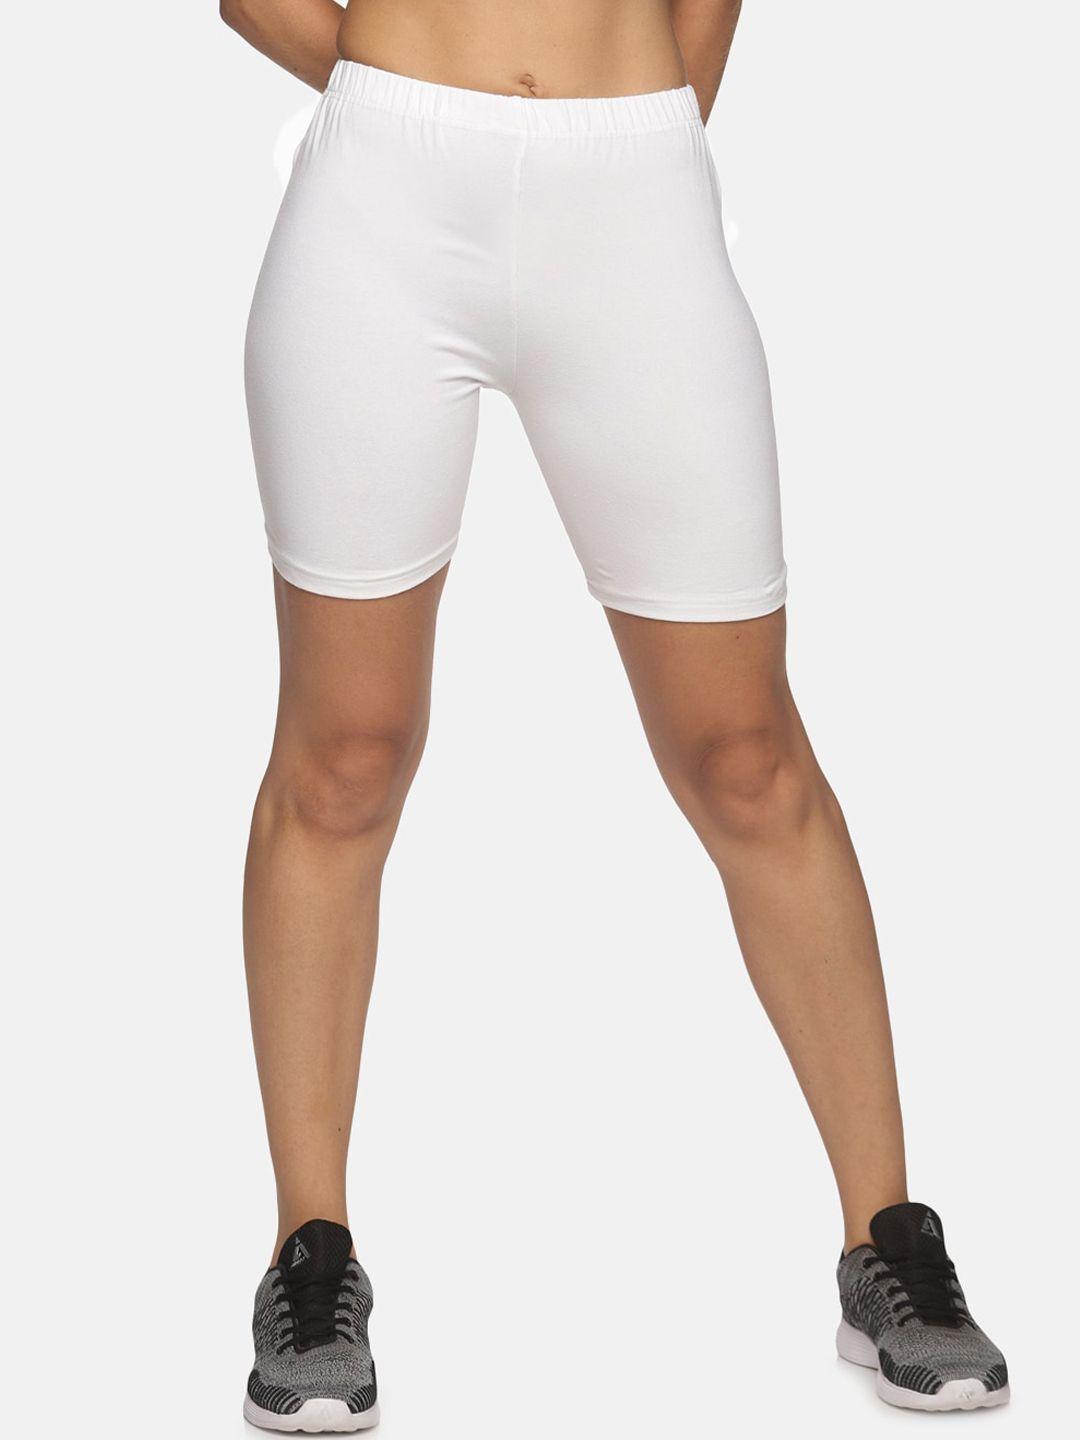 not-yet-by-us-women-white-slim-fit-outdoor-sports-shorts